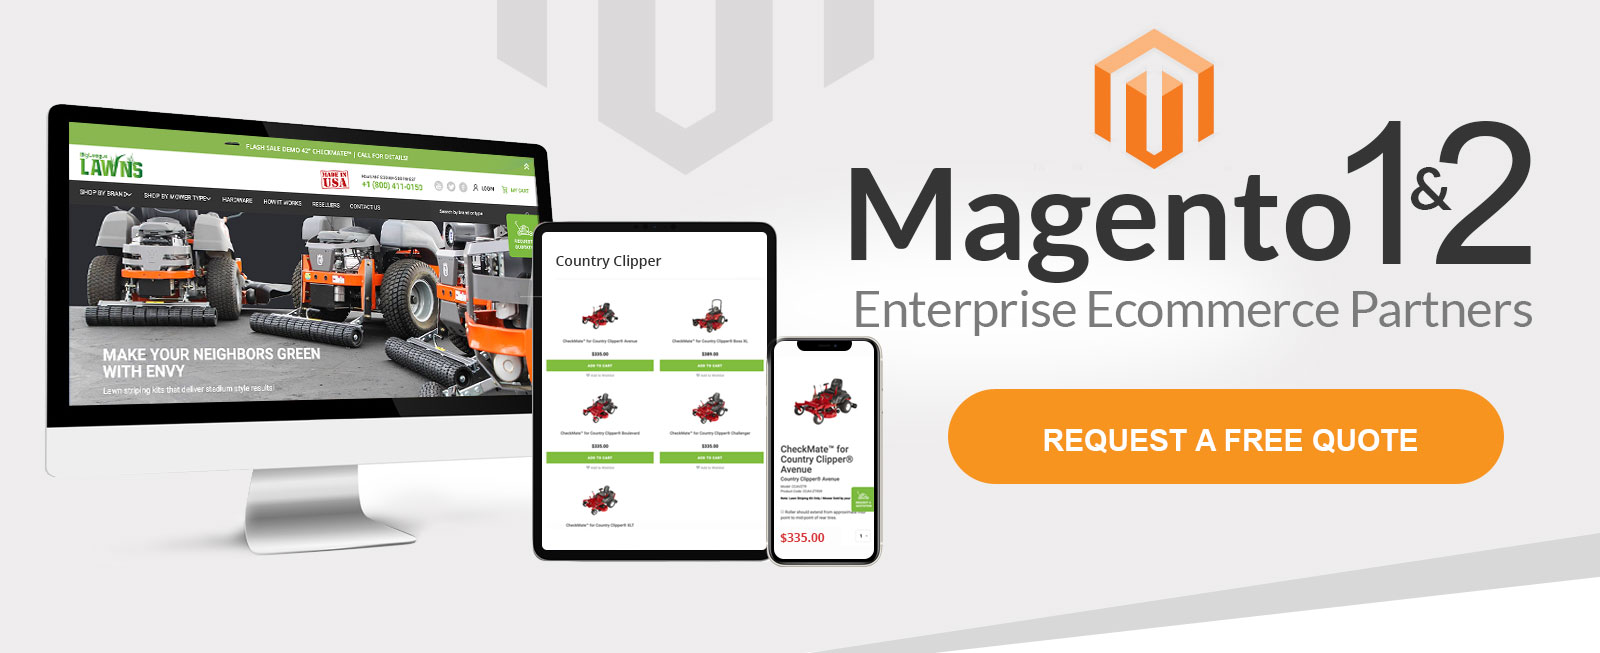 Magento 1&2 Enterprise Ecommerce Partners. Request a free quote!